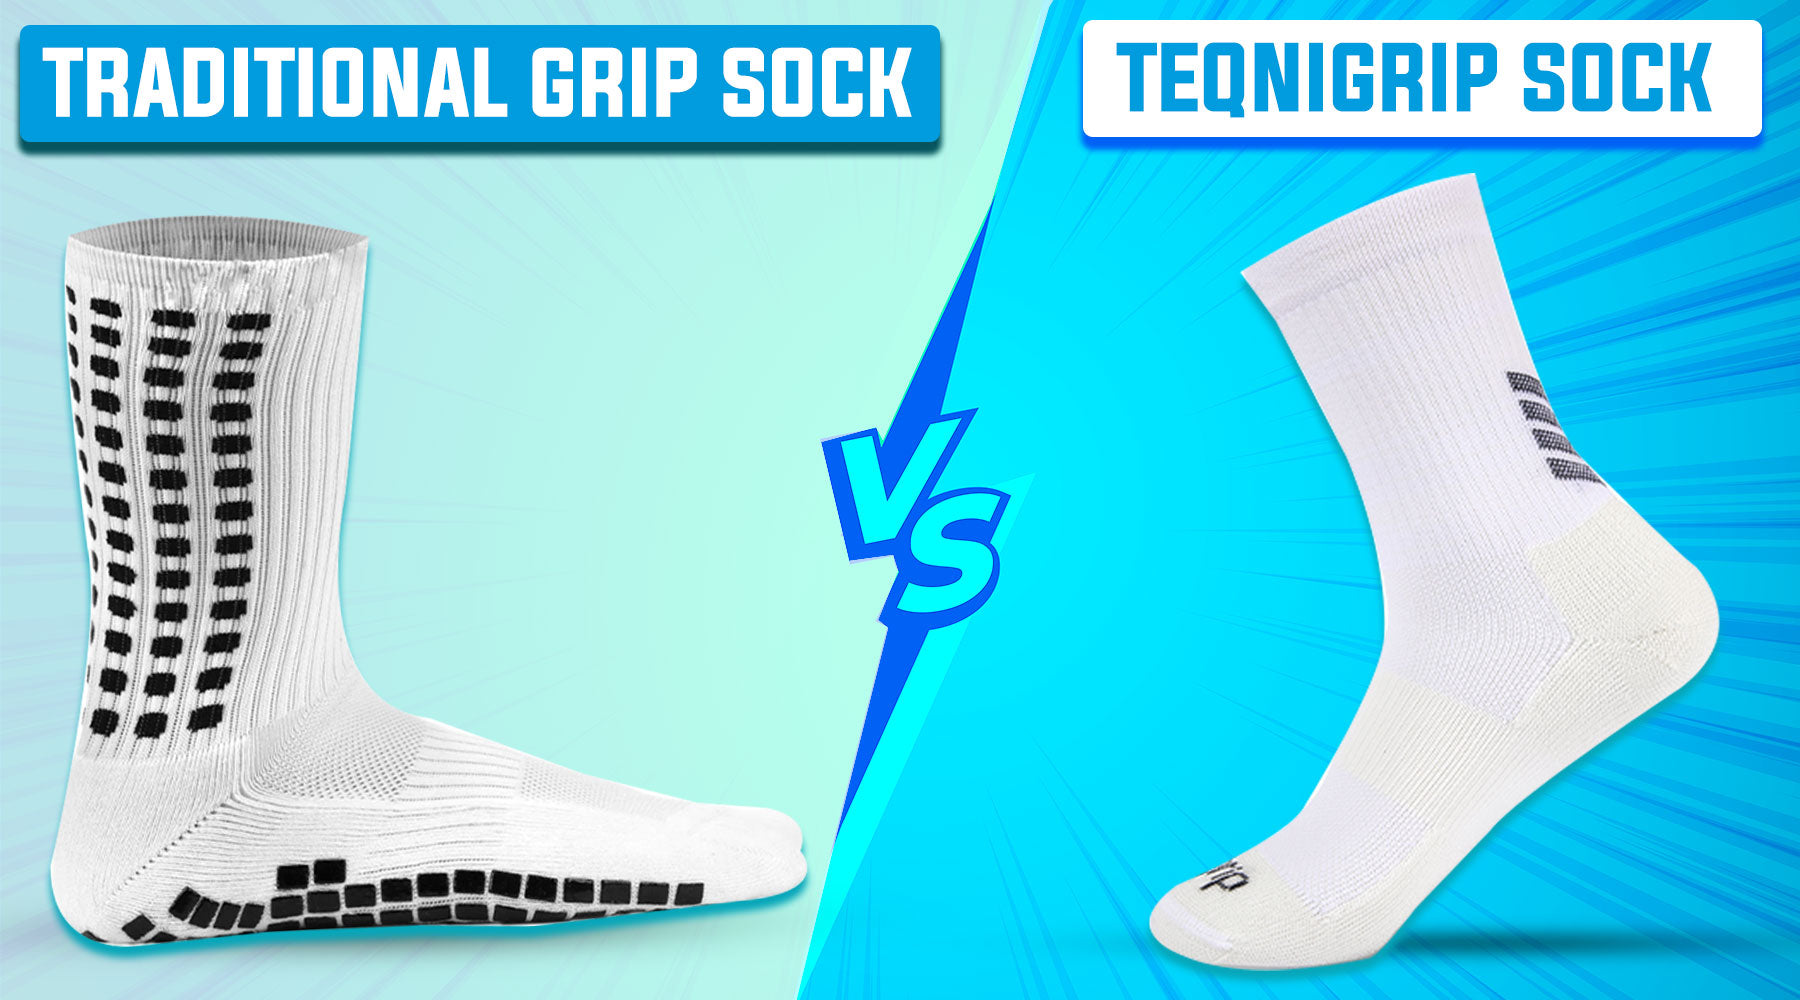 Light as Air: Teqnigrip Socks vs. Traditional Grip Socks – The Weighty Impact on Performance